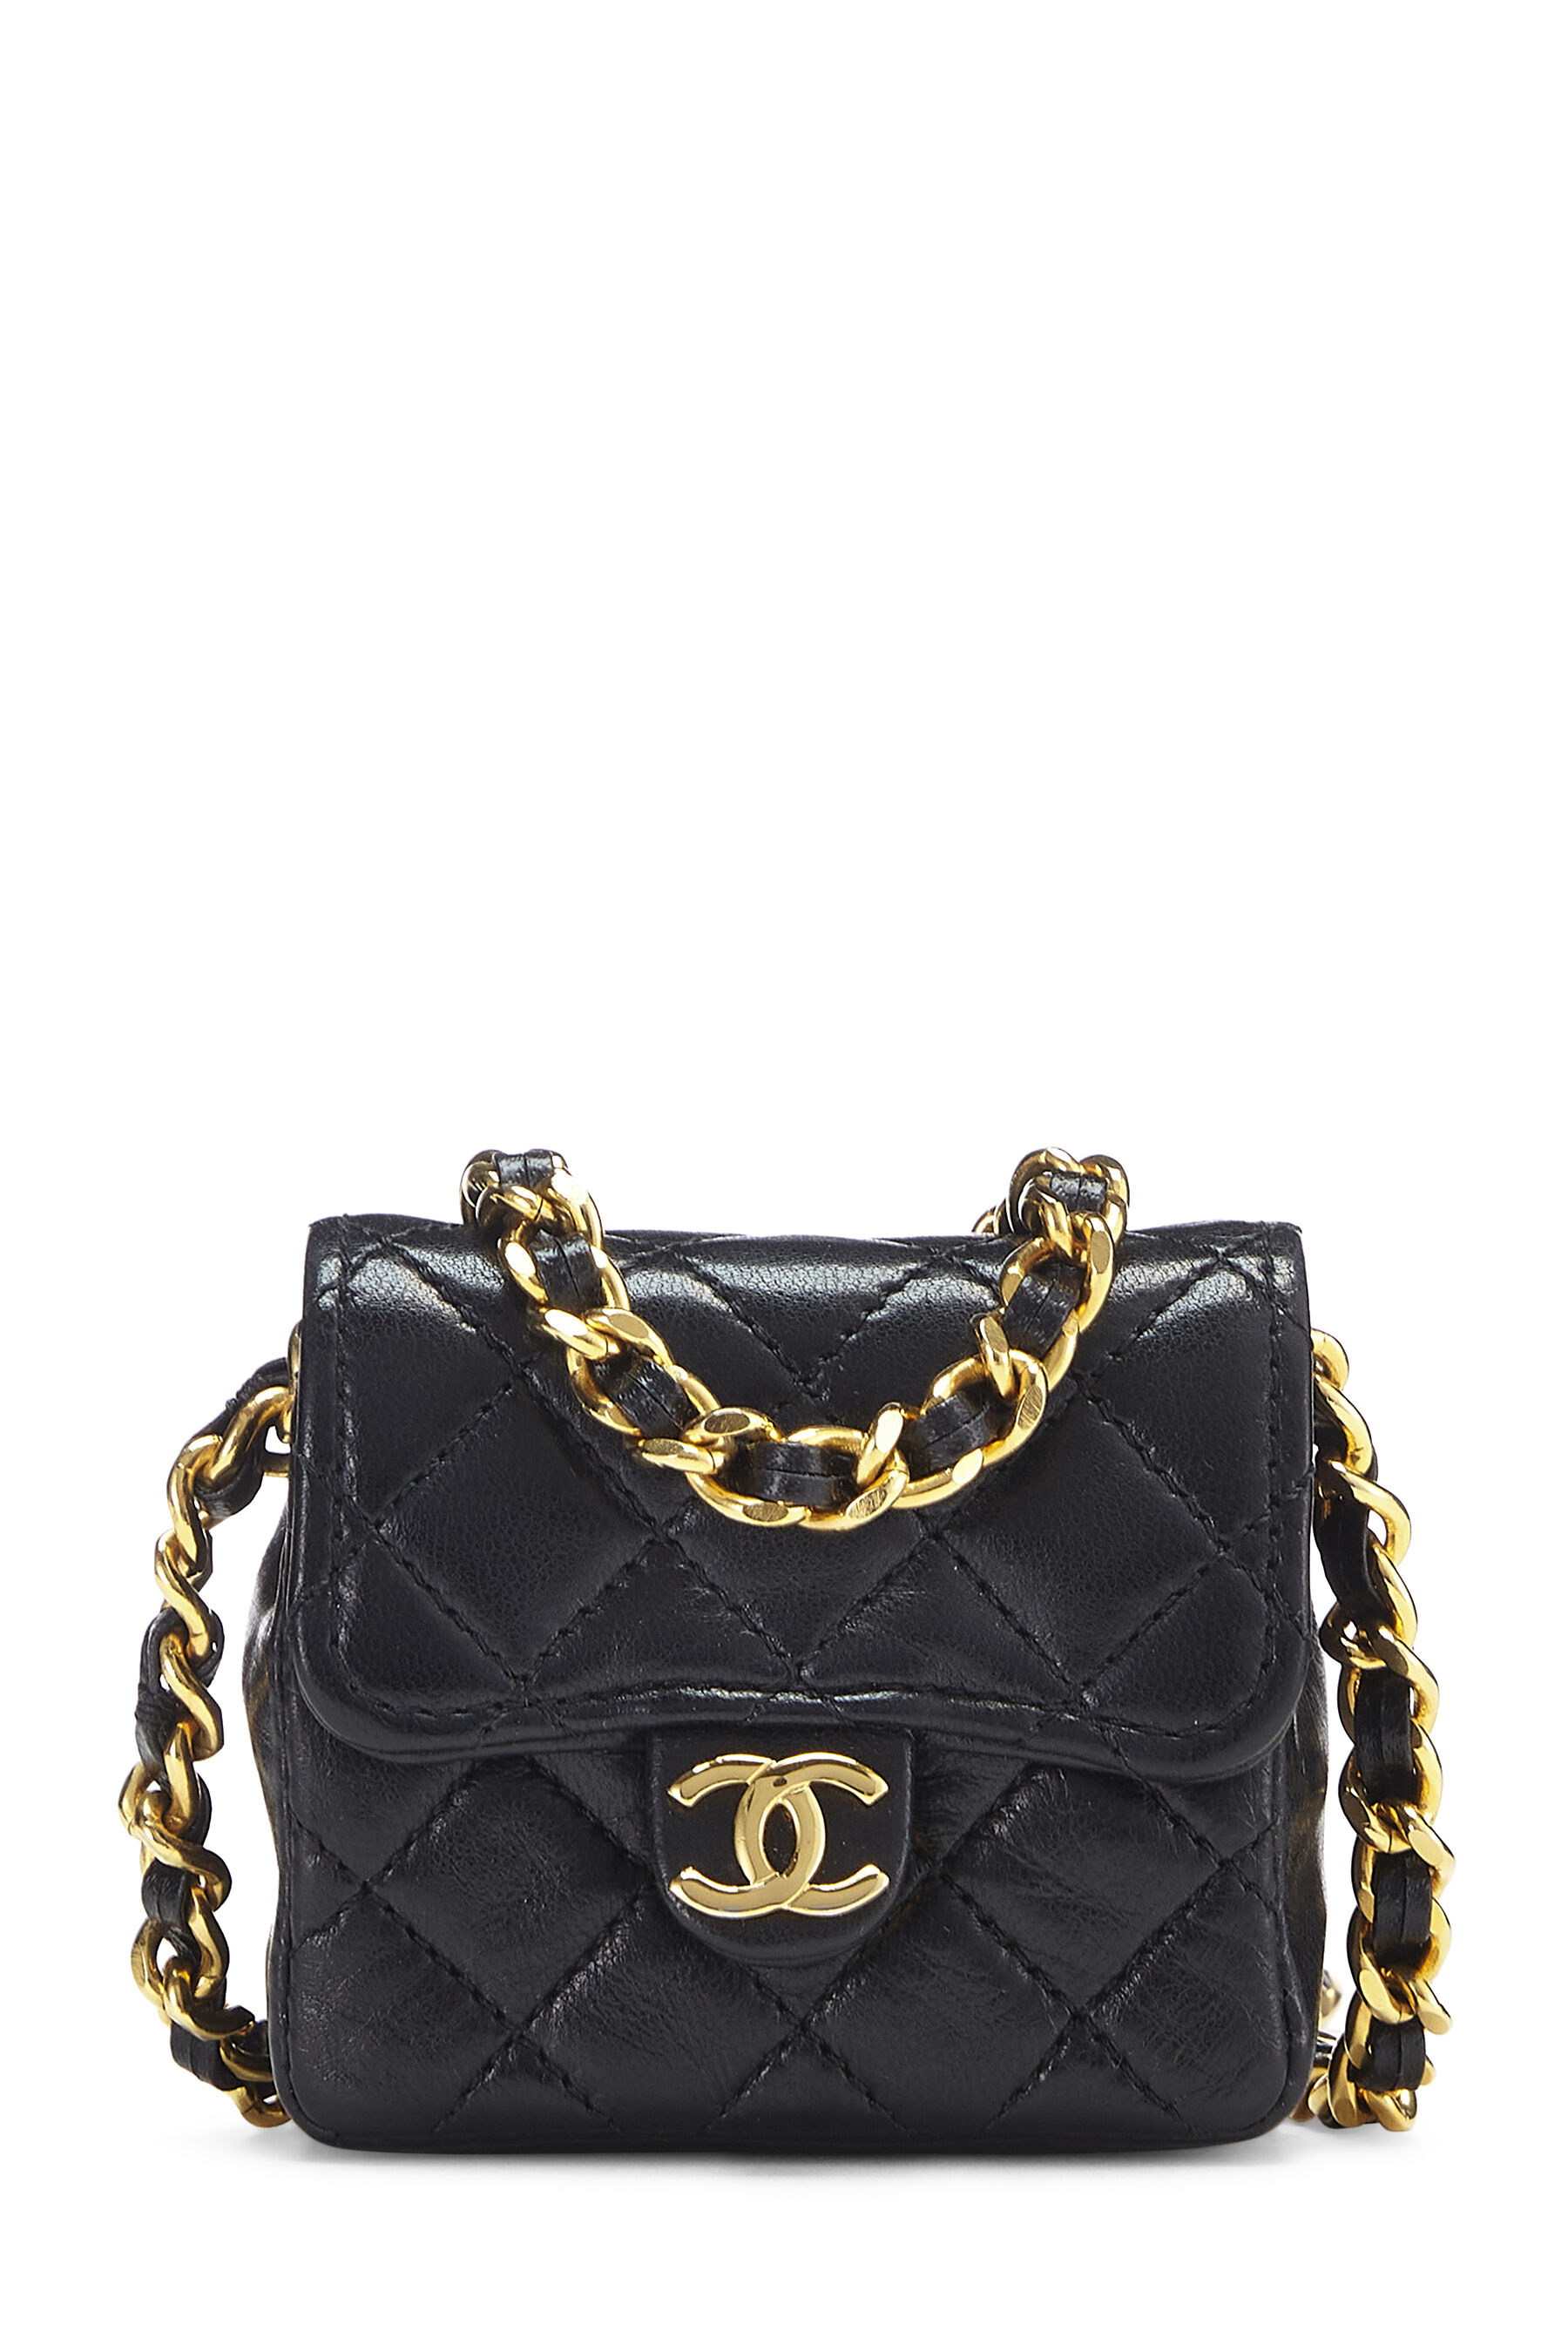 Chanel Flap Bag with Coin Purse Black  Balilene